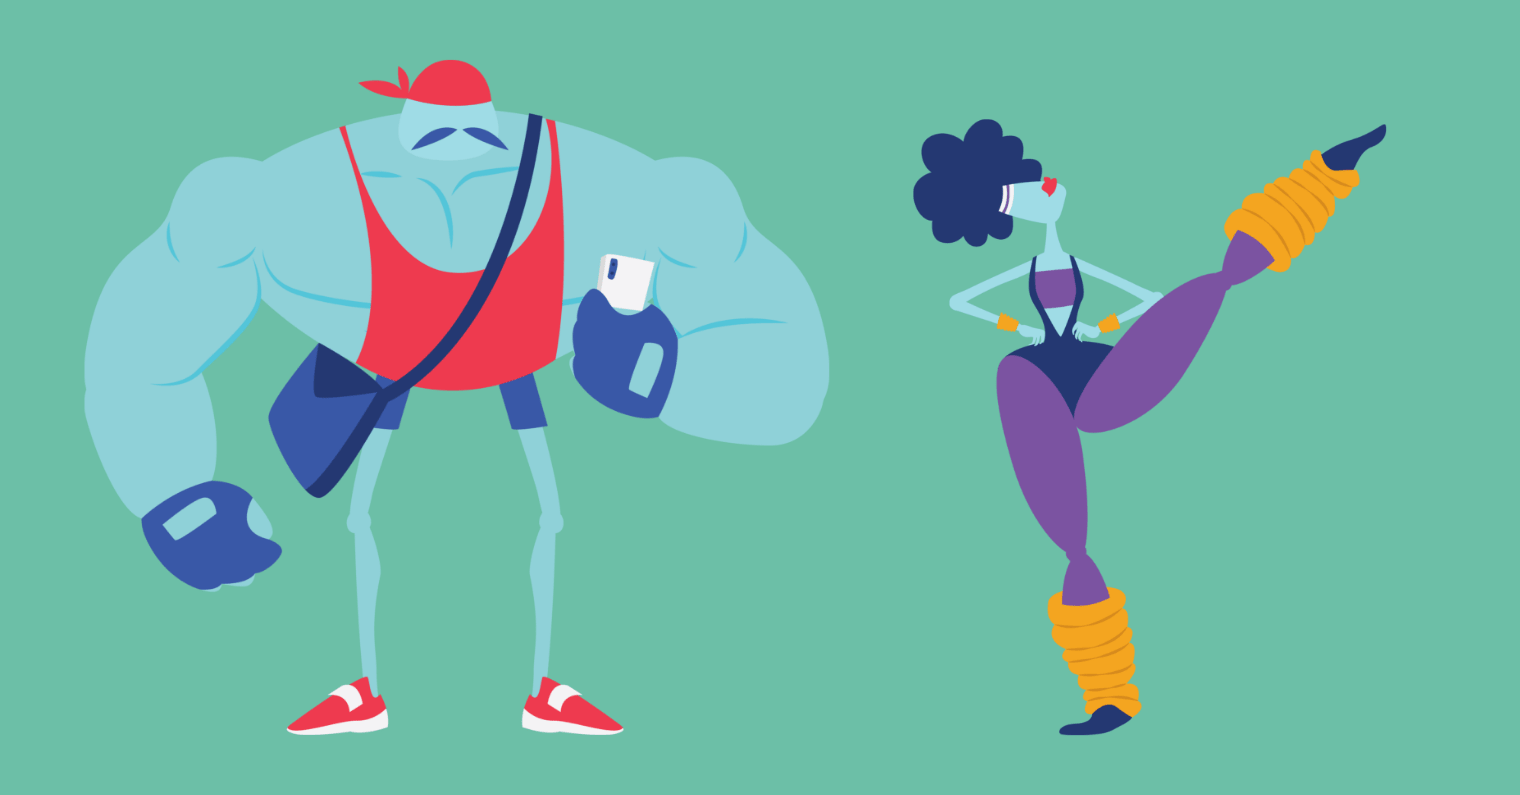 Exercising illustrated characters